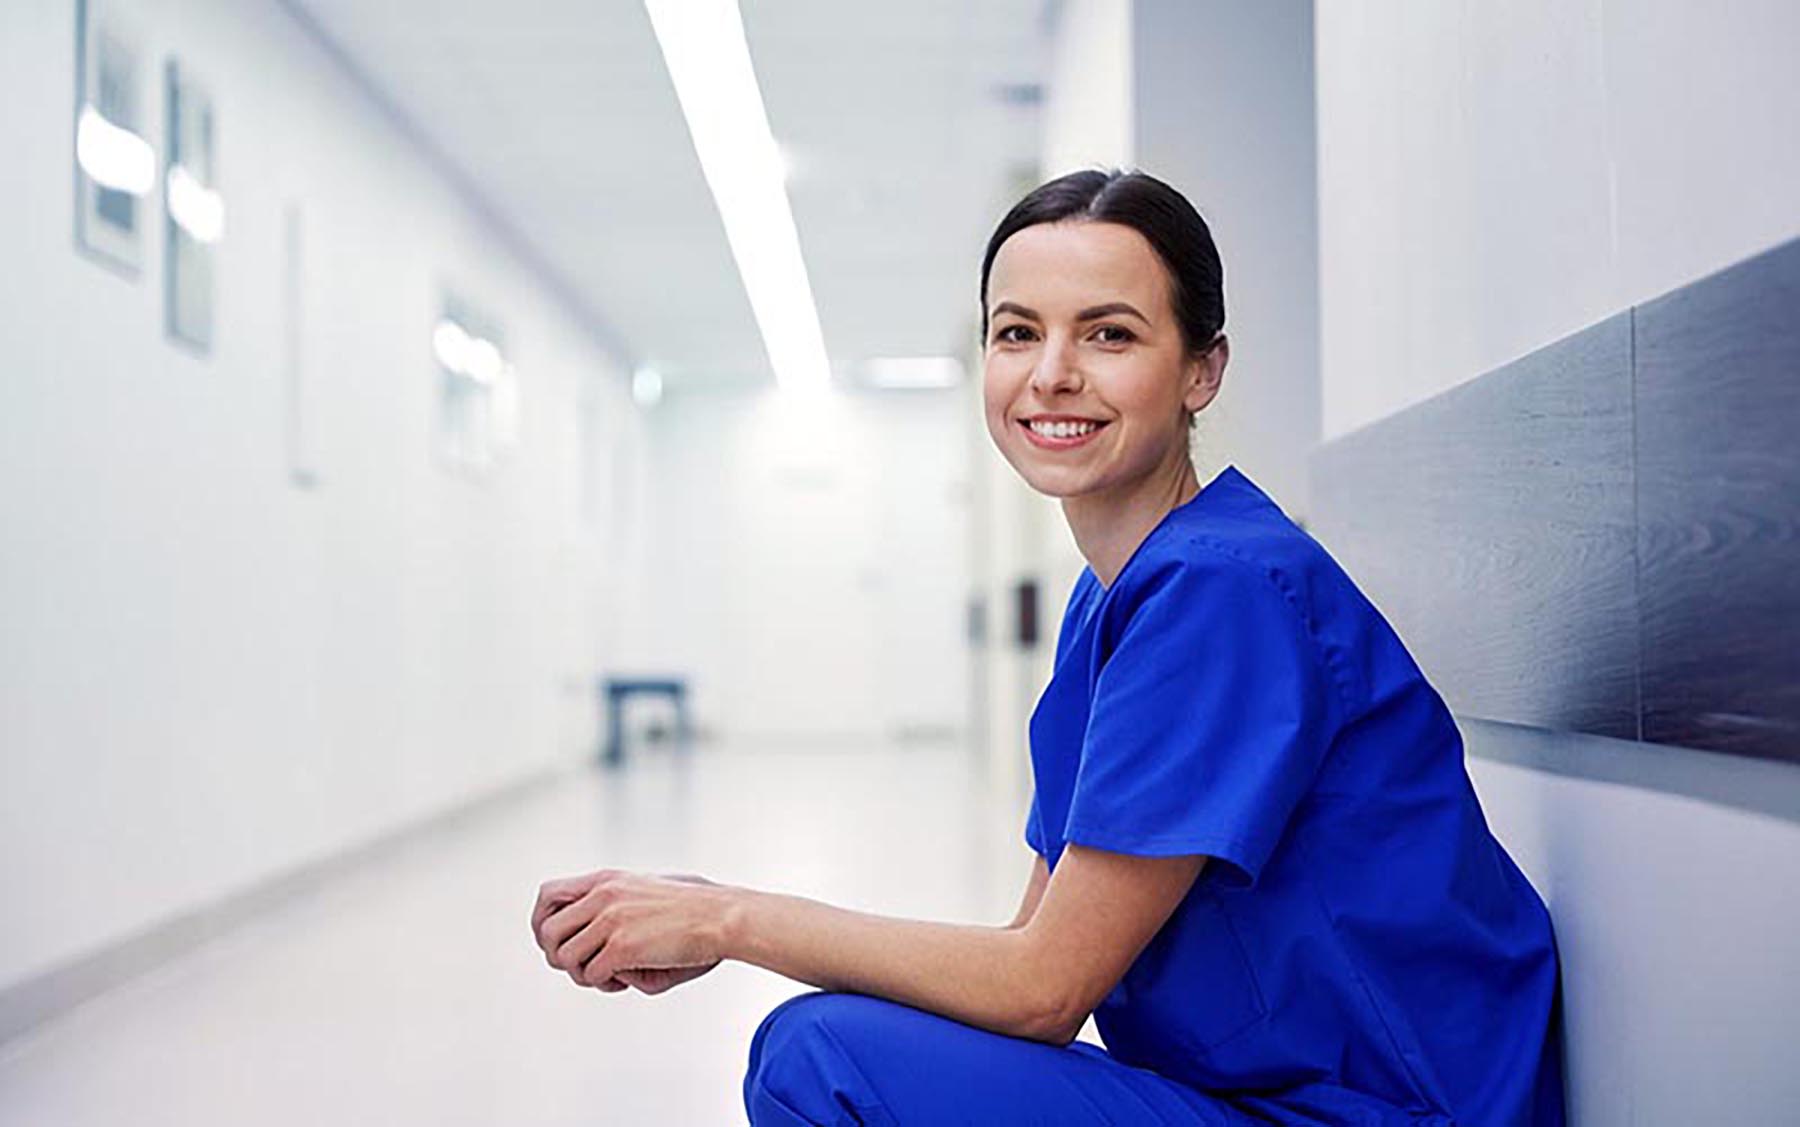 What Can You Do with an Associate’s Degree in Nursing?